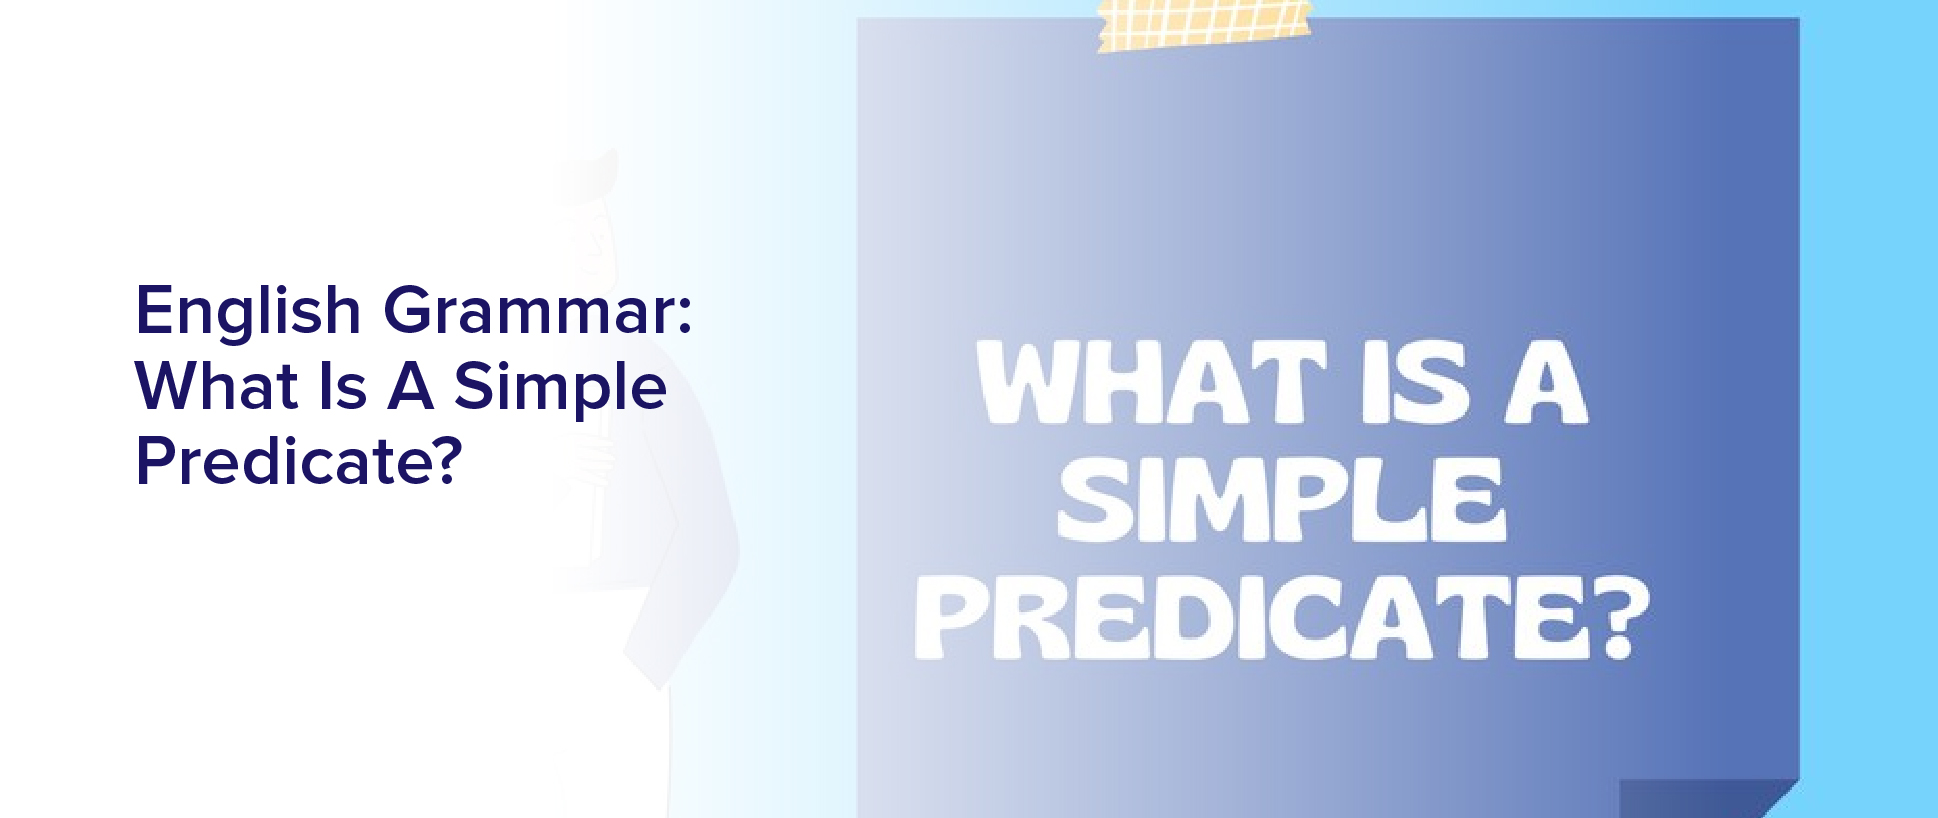 What Is A Simple Predicate